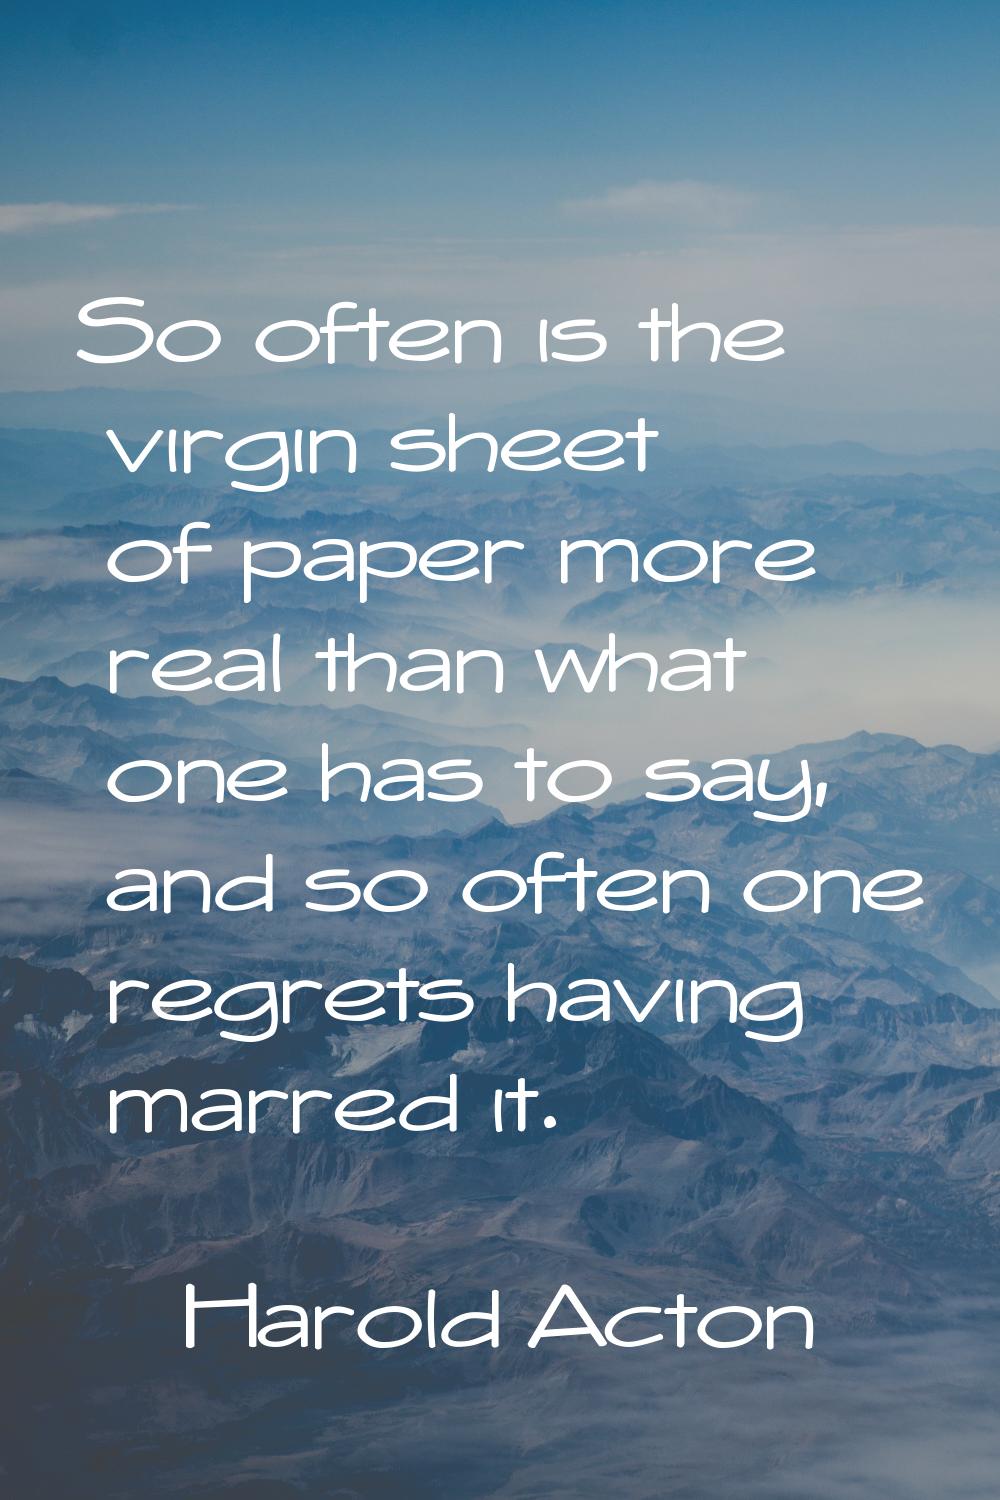 So often is the virgin sheet of paper more real than what one has to say, and so often one regrets 